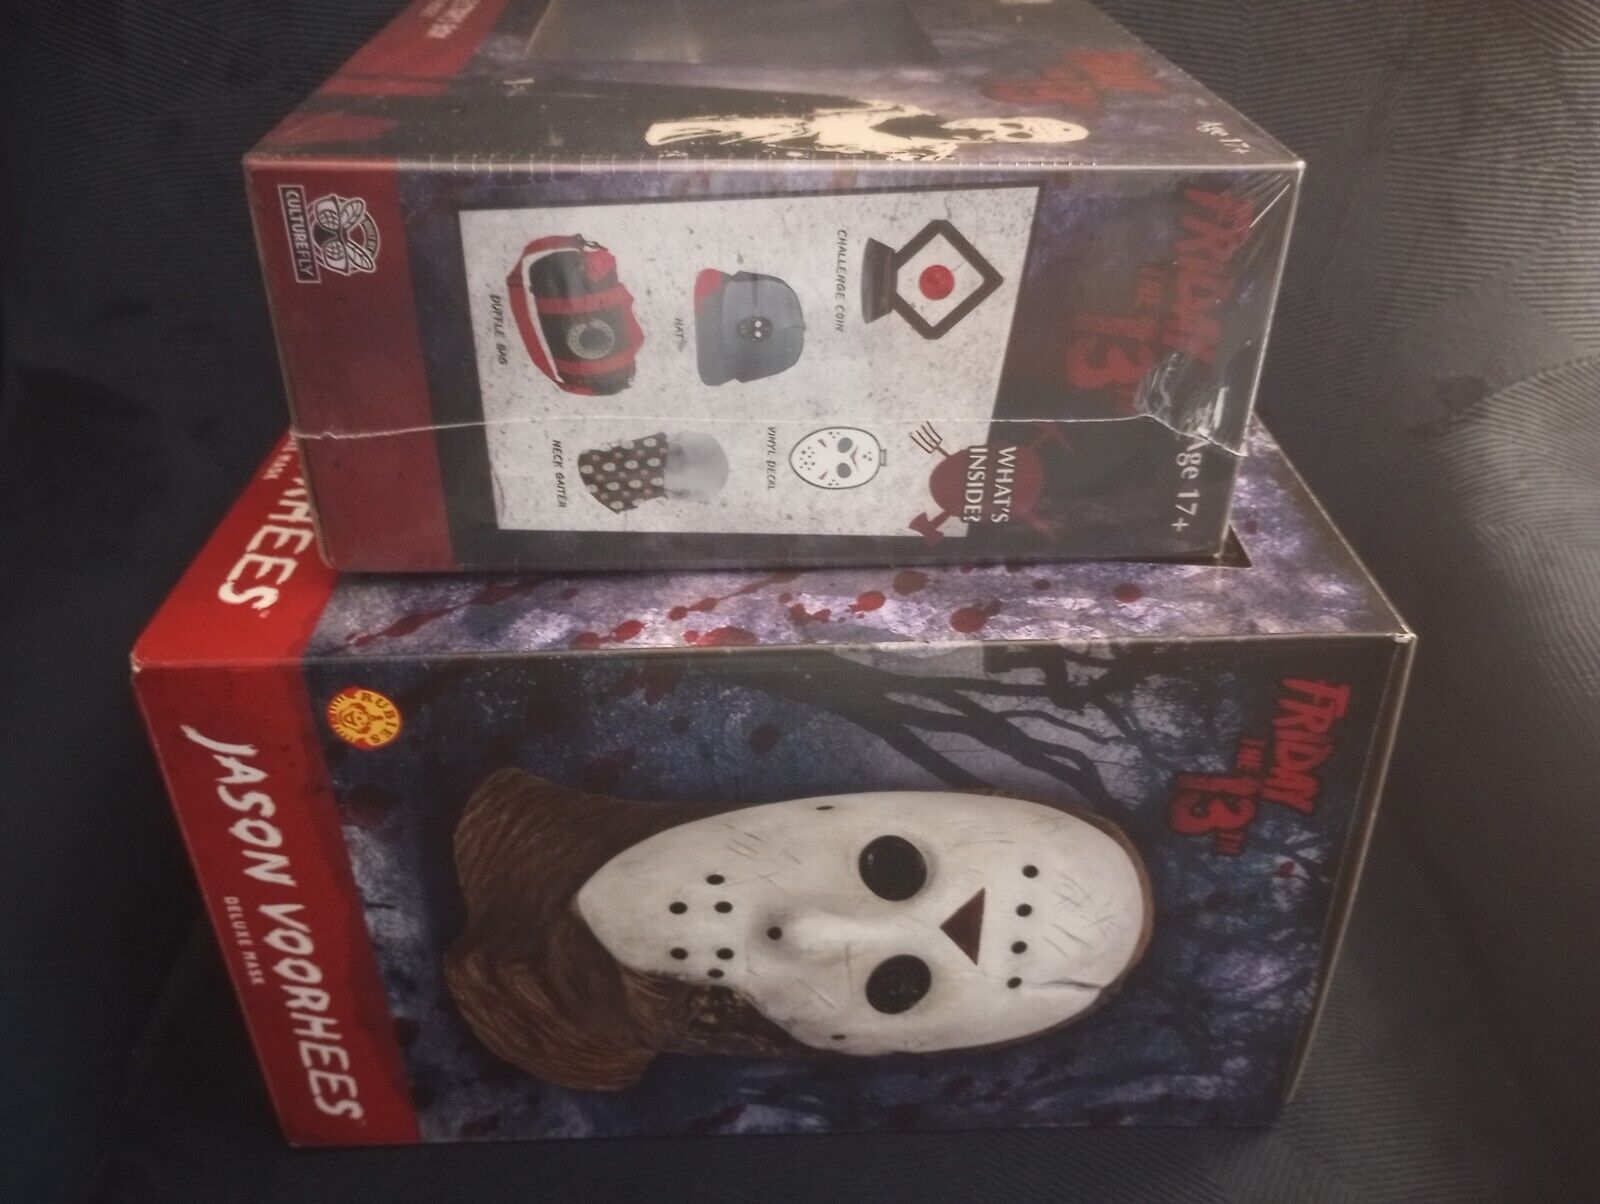 FRIDAY THE 13TH JASON VOORHEES Deluxe Mask + Collector's Box Rubie's 4181 - фотография #8